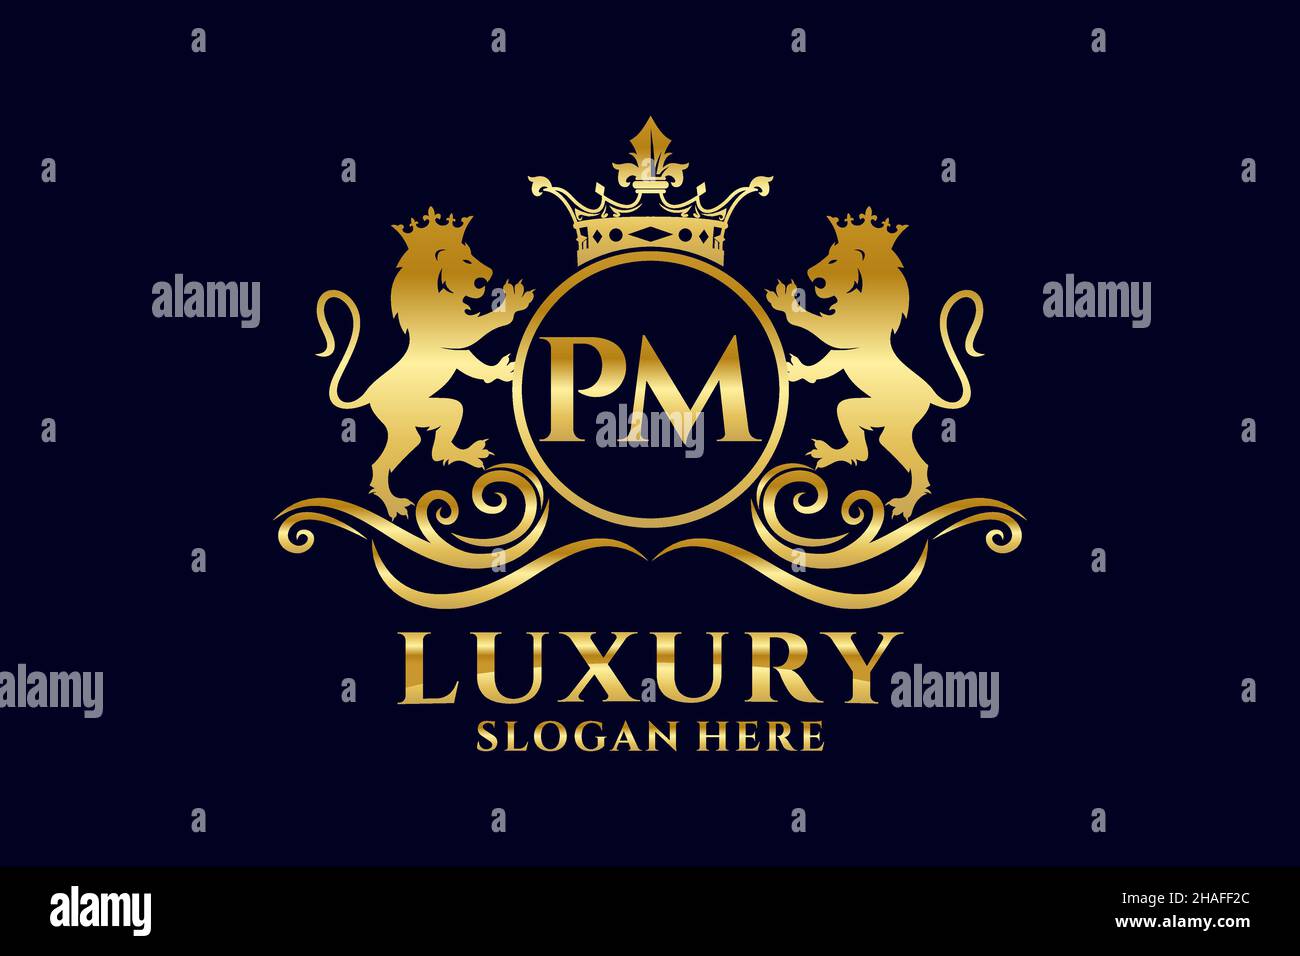 Pm letter initial luxurious brand logo template Vector Image